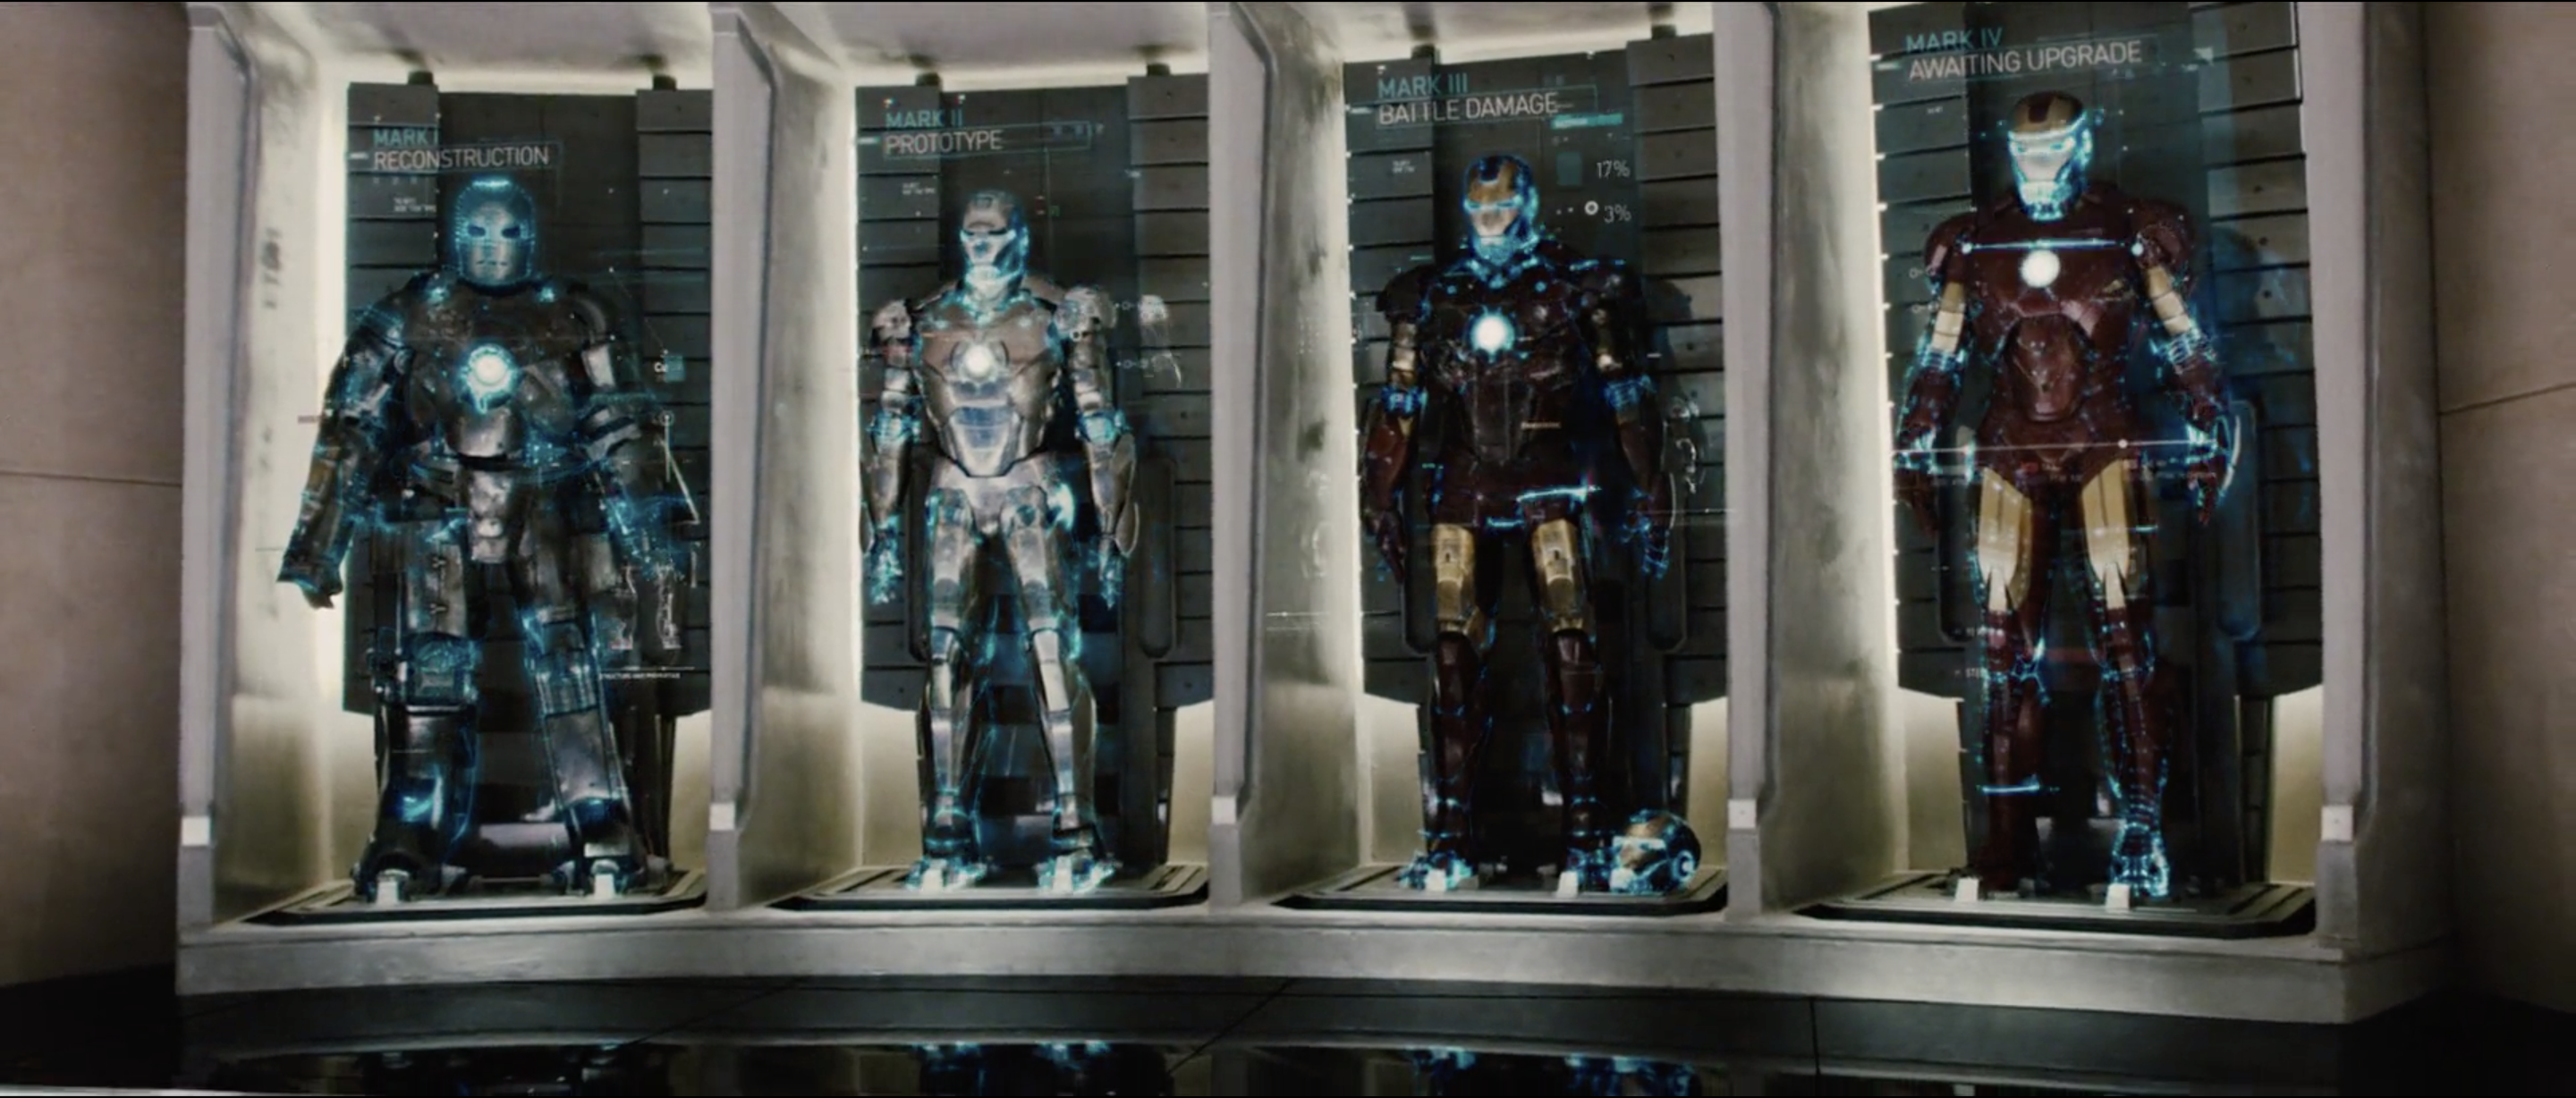 First Hall of Armors as seen in Iron Man 2.